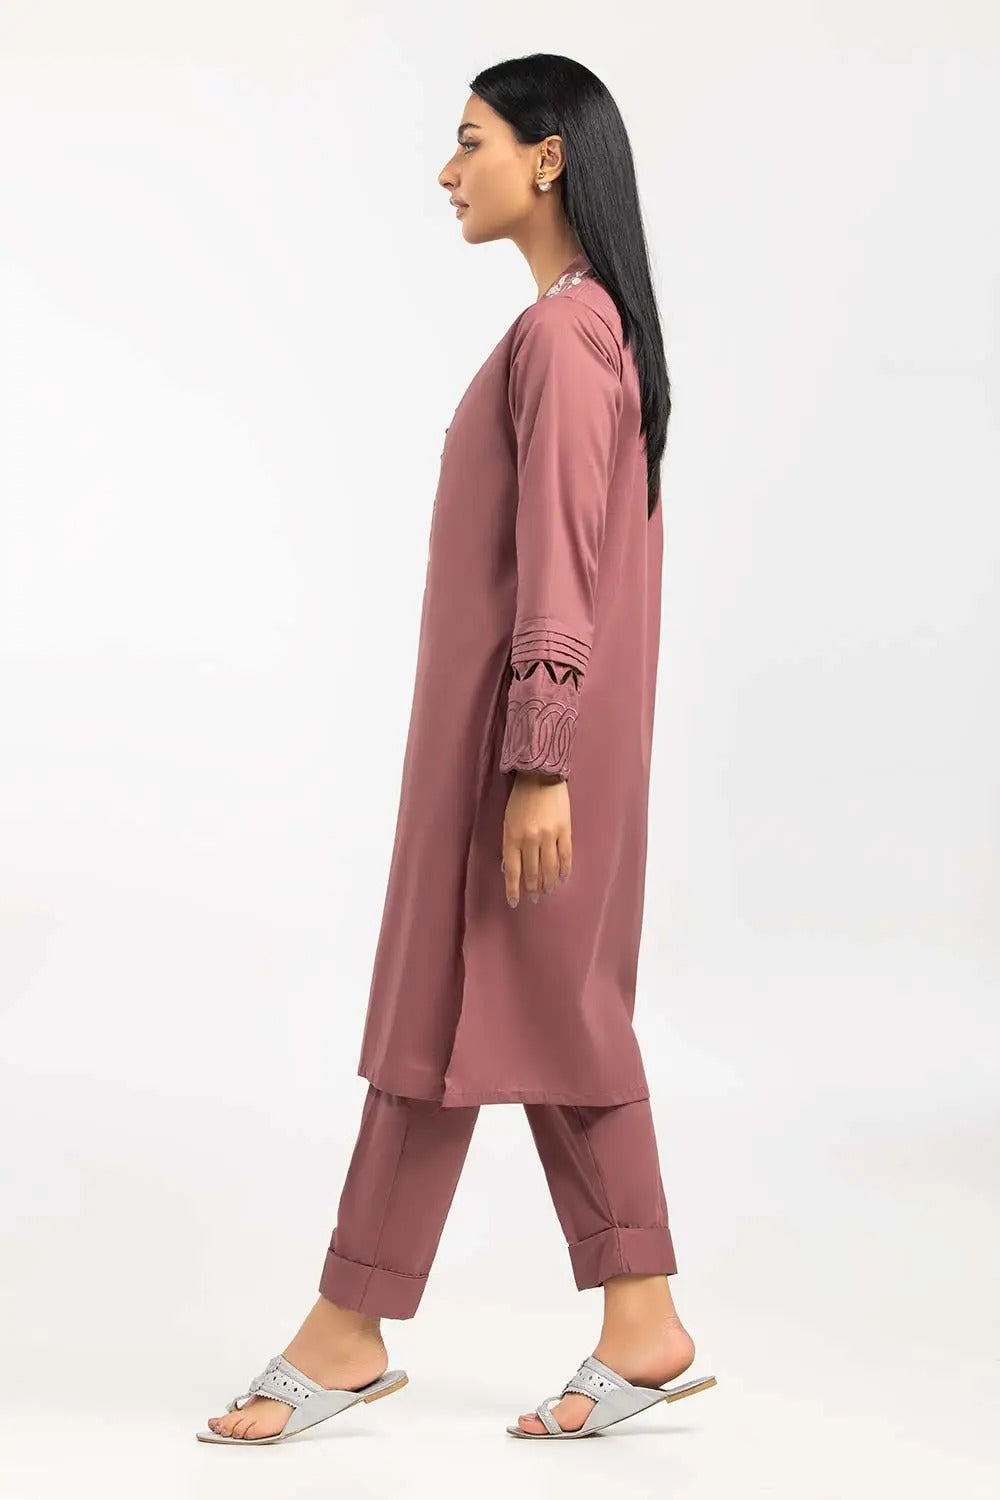 Gul Ahmed Kaaj 02 Piece Stitched Embroidered Cambric Shirt With Trousers IPS-21-83